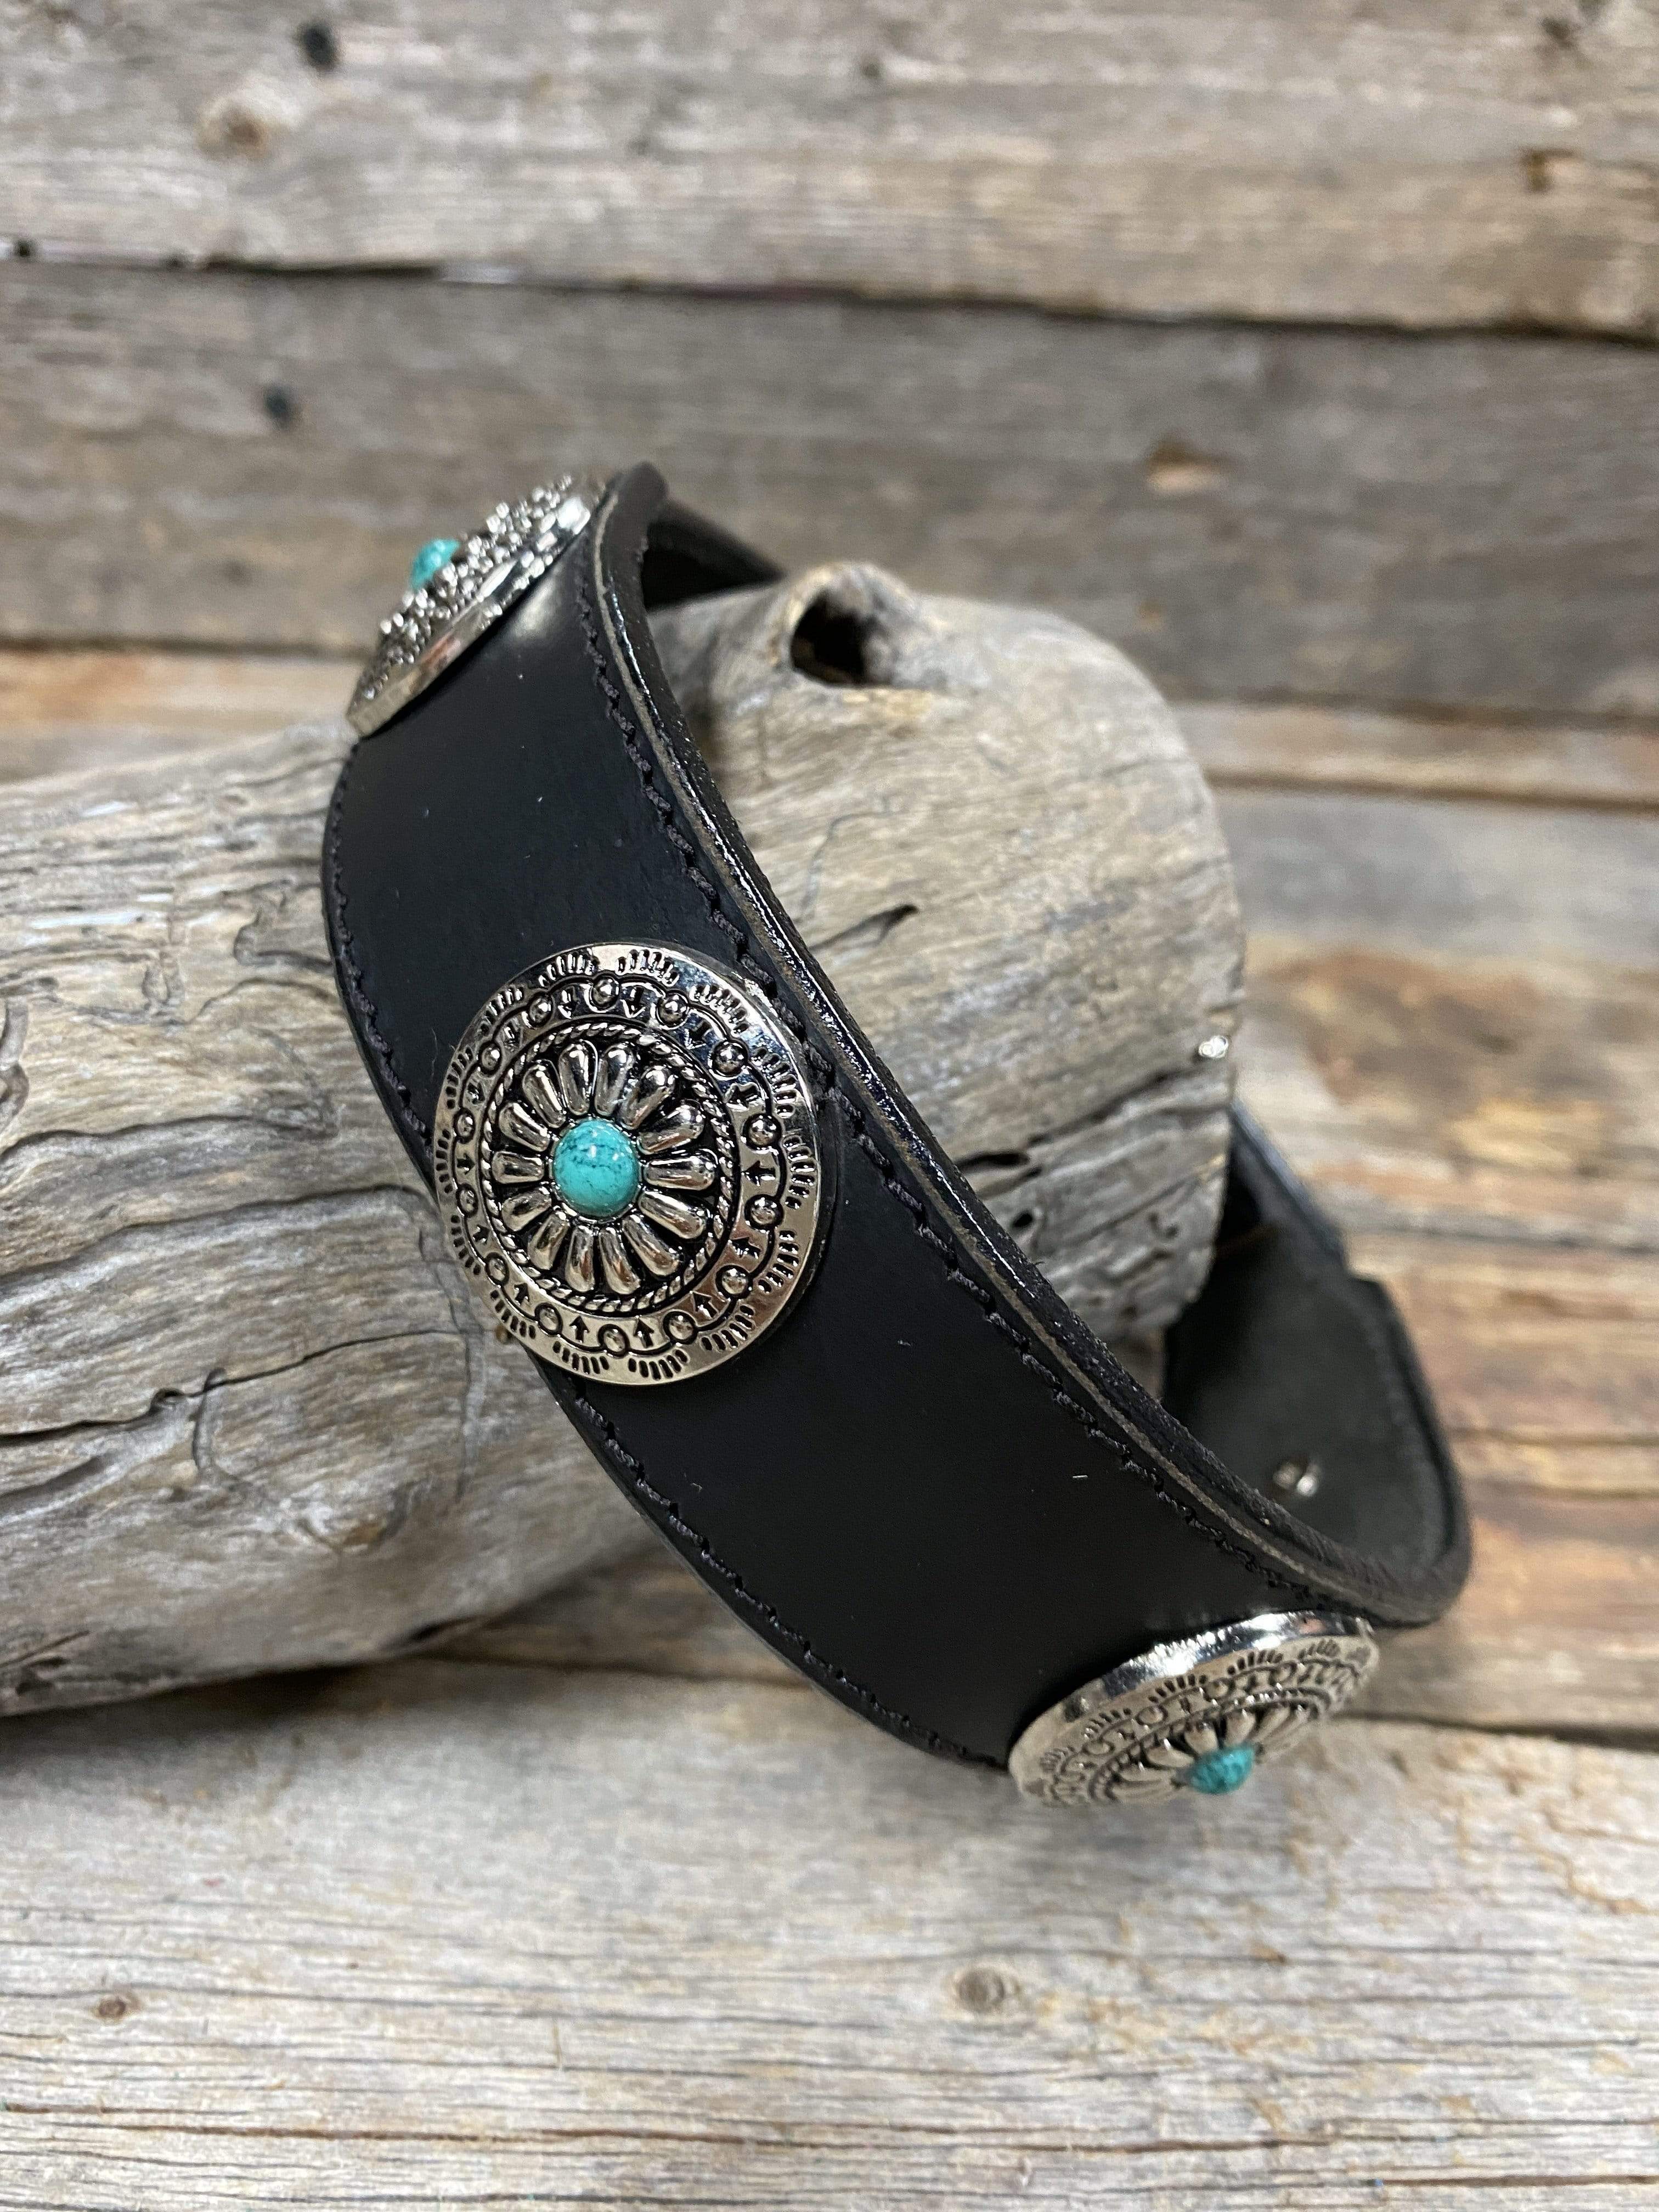 Designer Dog Collars SMALL / TURQUOISE Black Leather Dog Collar Sizes Small - Medium - Southwest Conchos LL#401 LL401SMGR